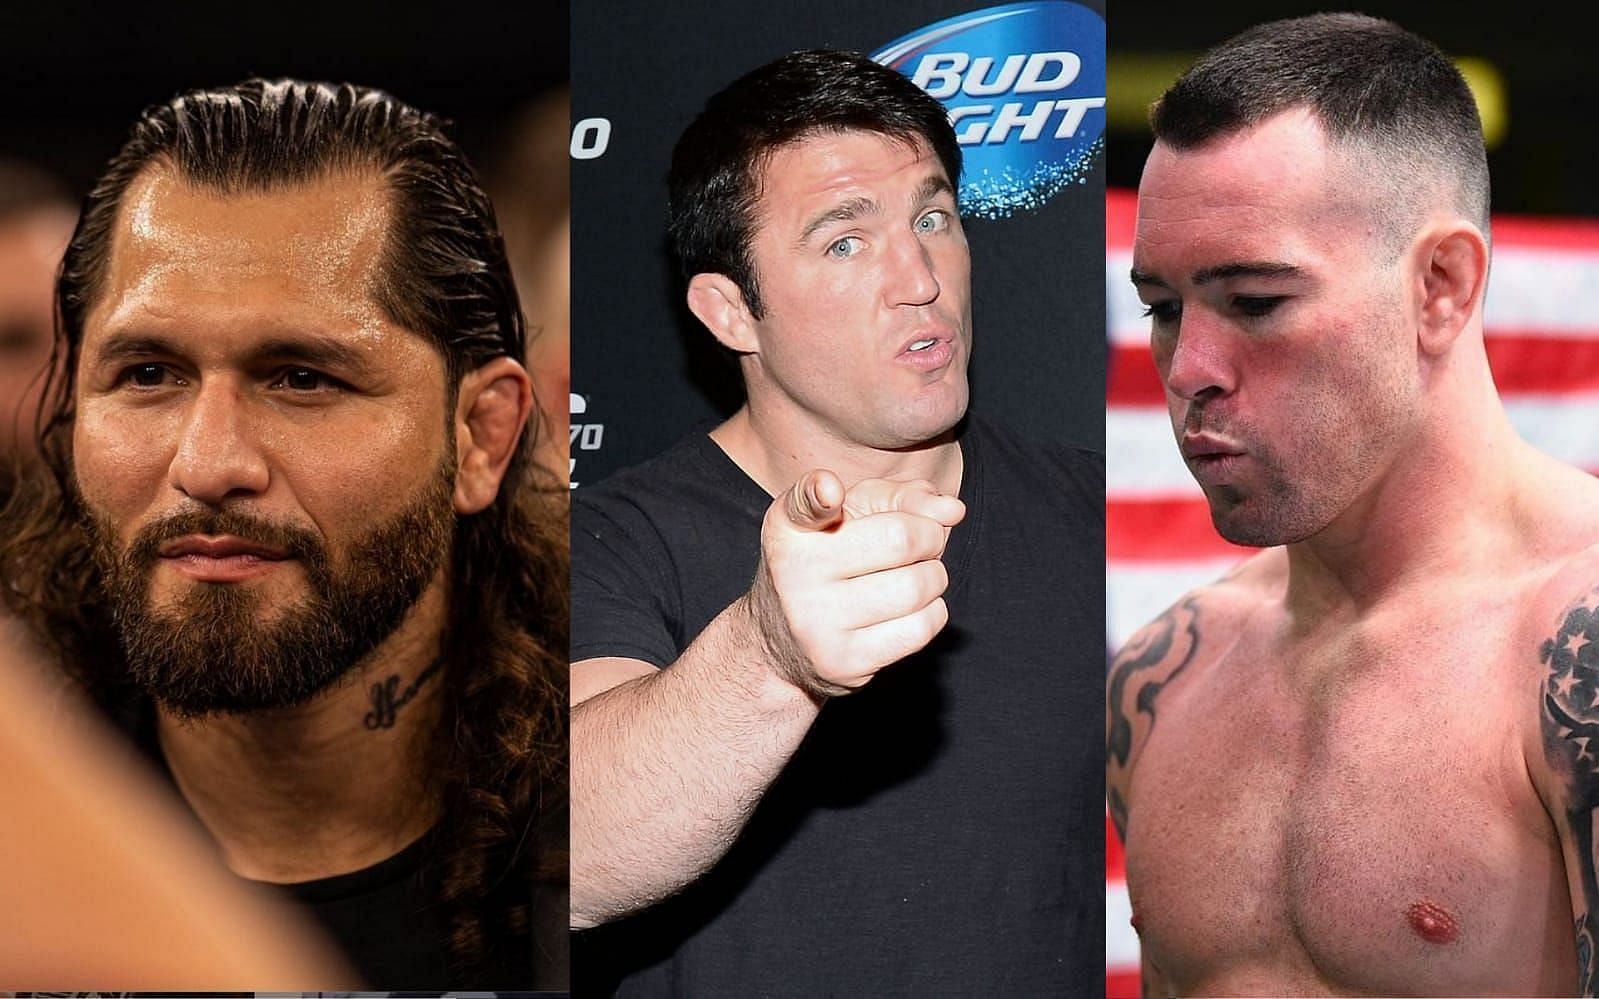 Jorge Masvidal, Chael Sonnen, and Colby Covington (left to right) [Credits: @gamebredfighter, @colbycovmma via Instagram]